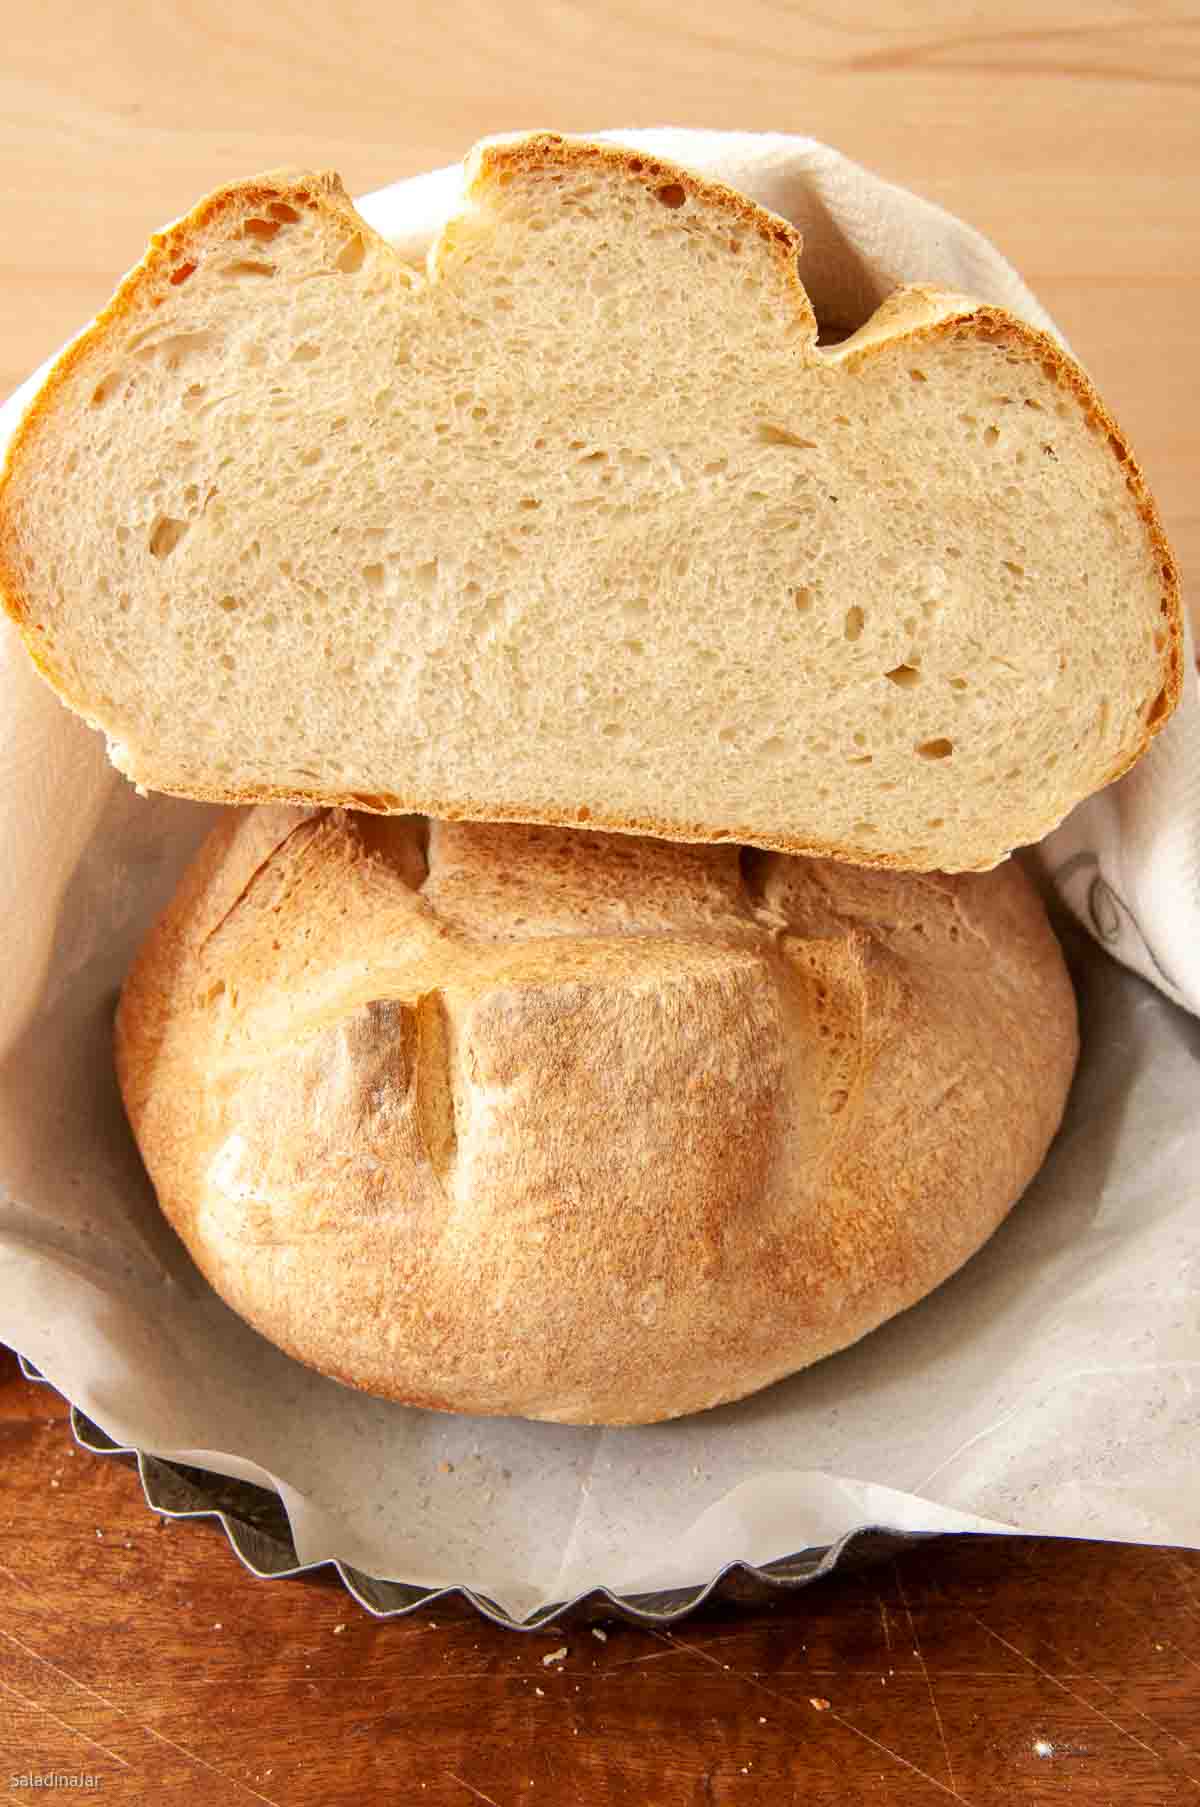 Bread loaf cut in half to show the texture